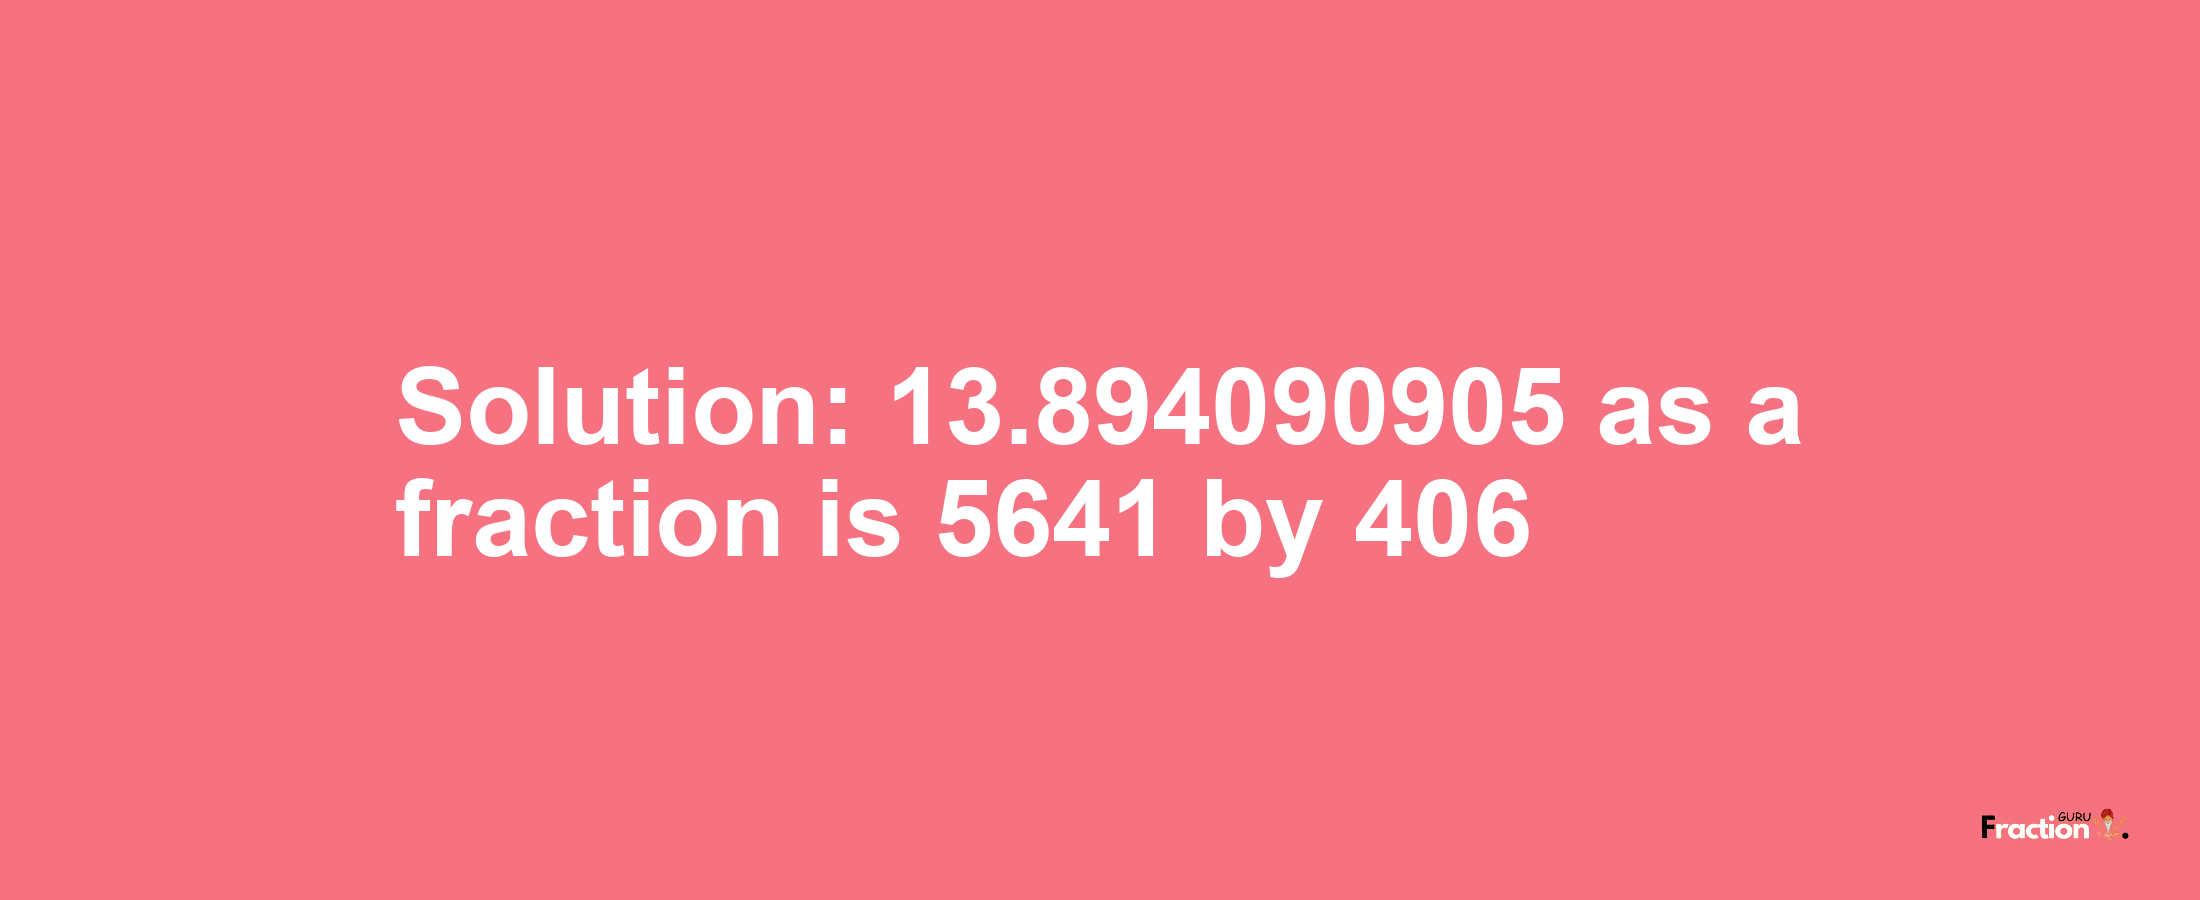 Solution:13.894090905 as a fraction is 5641/406